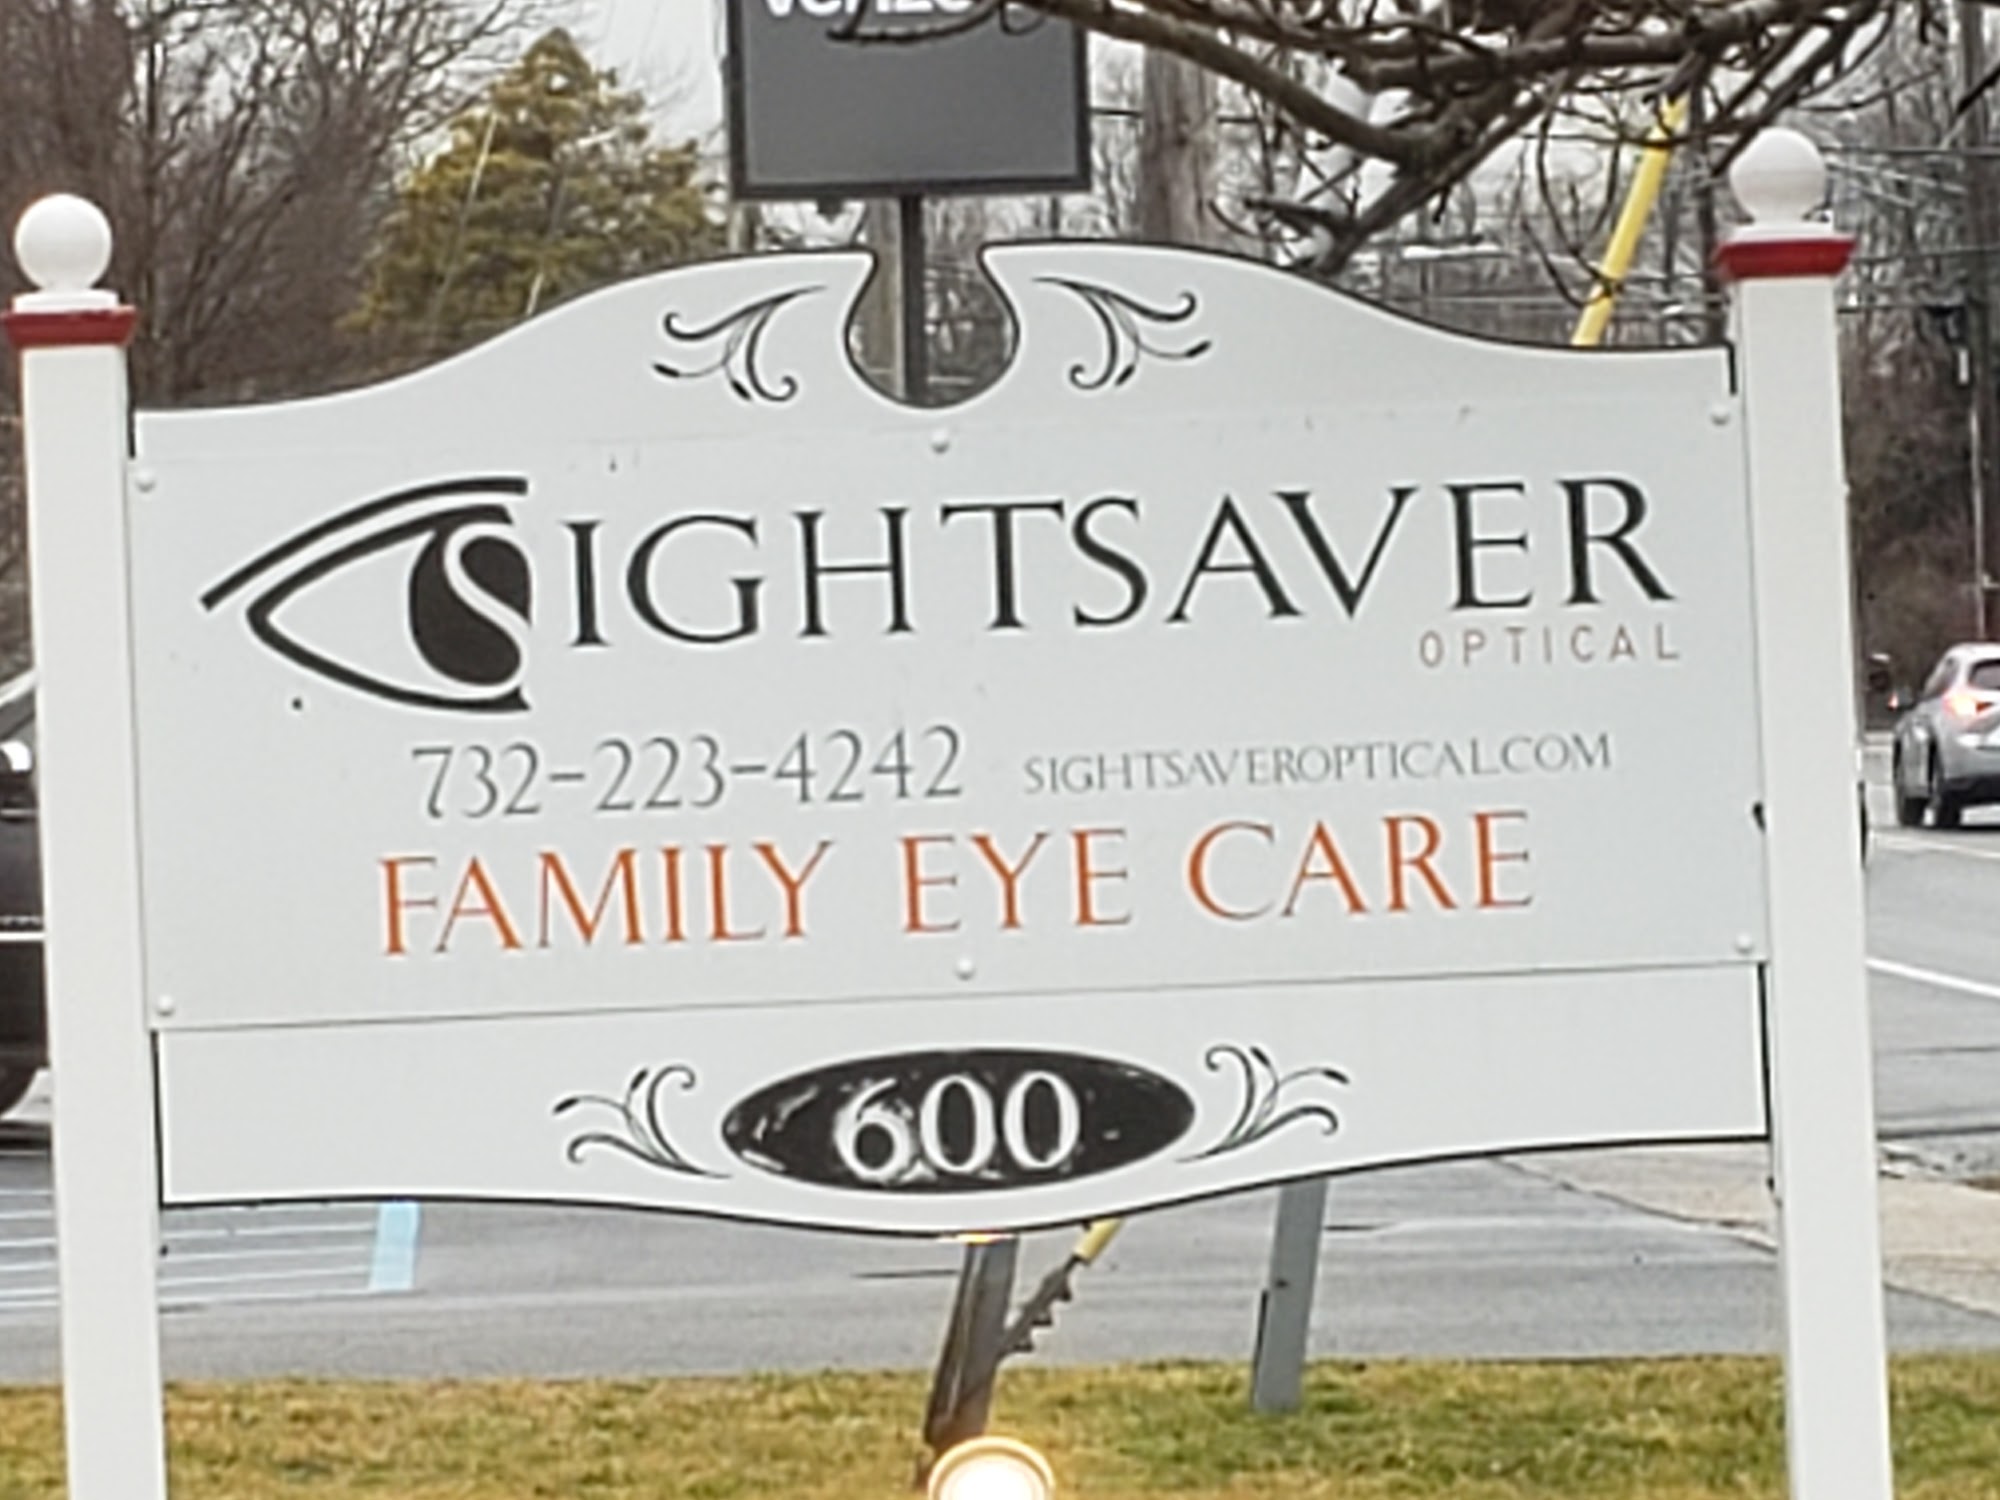 Sight Saver Optical 600 Union Ave #1, Brielle New Jersey 08730